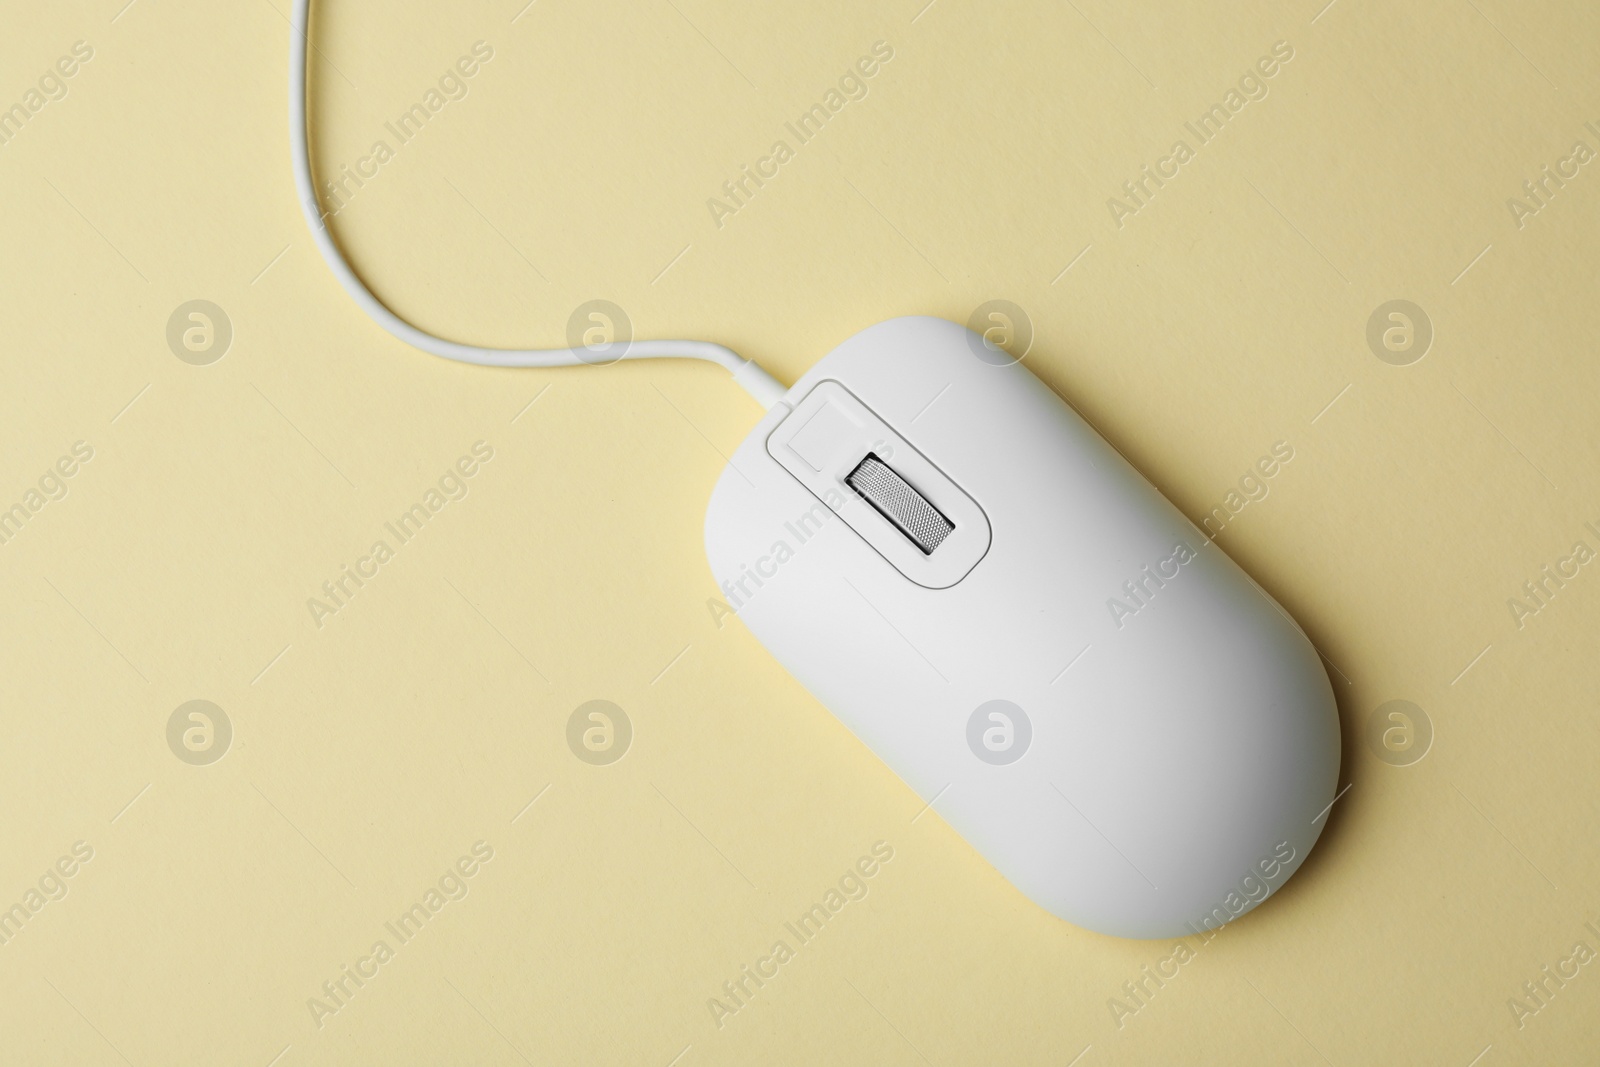 Photo of Wired computer mouse on yellow background, top view